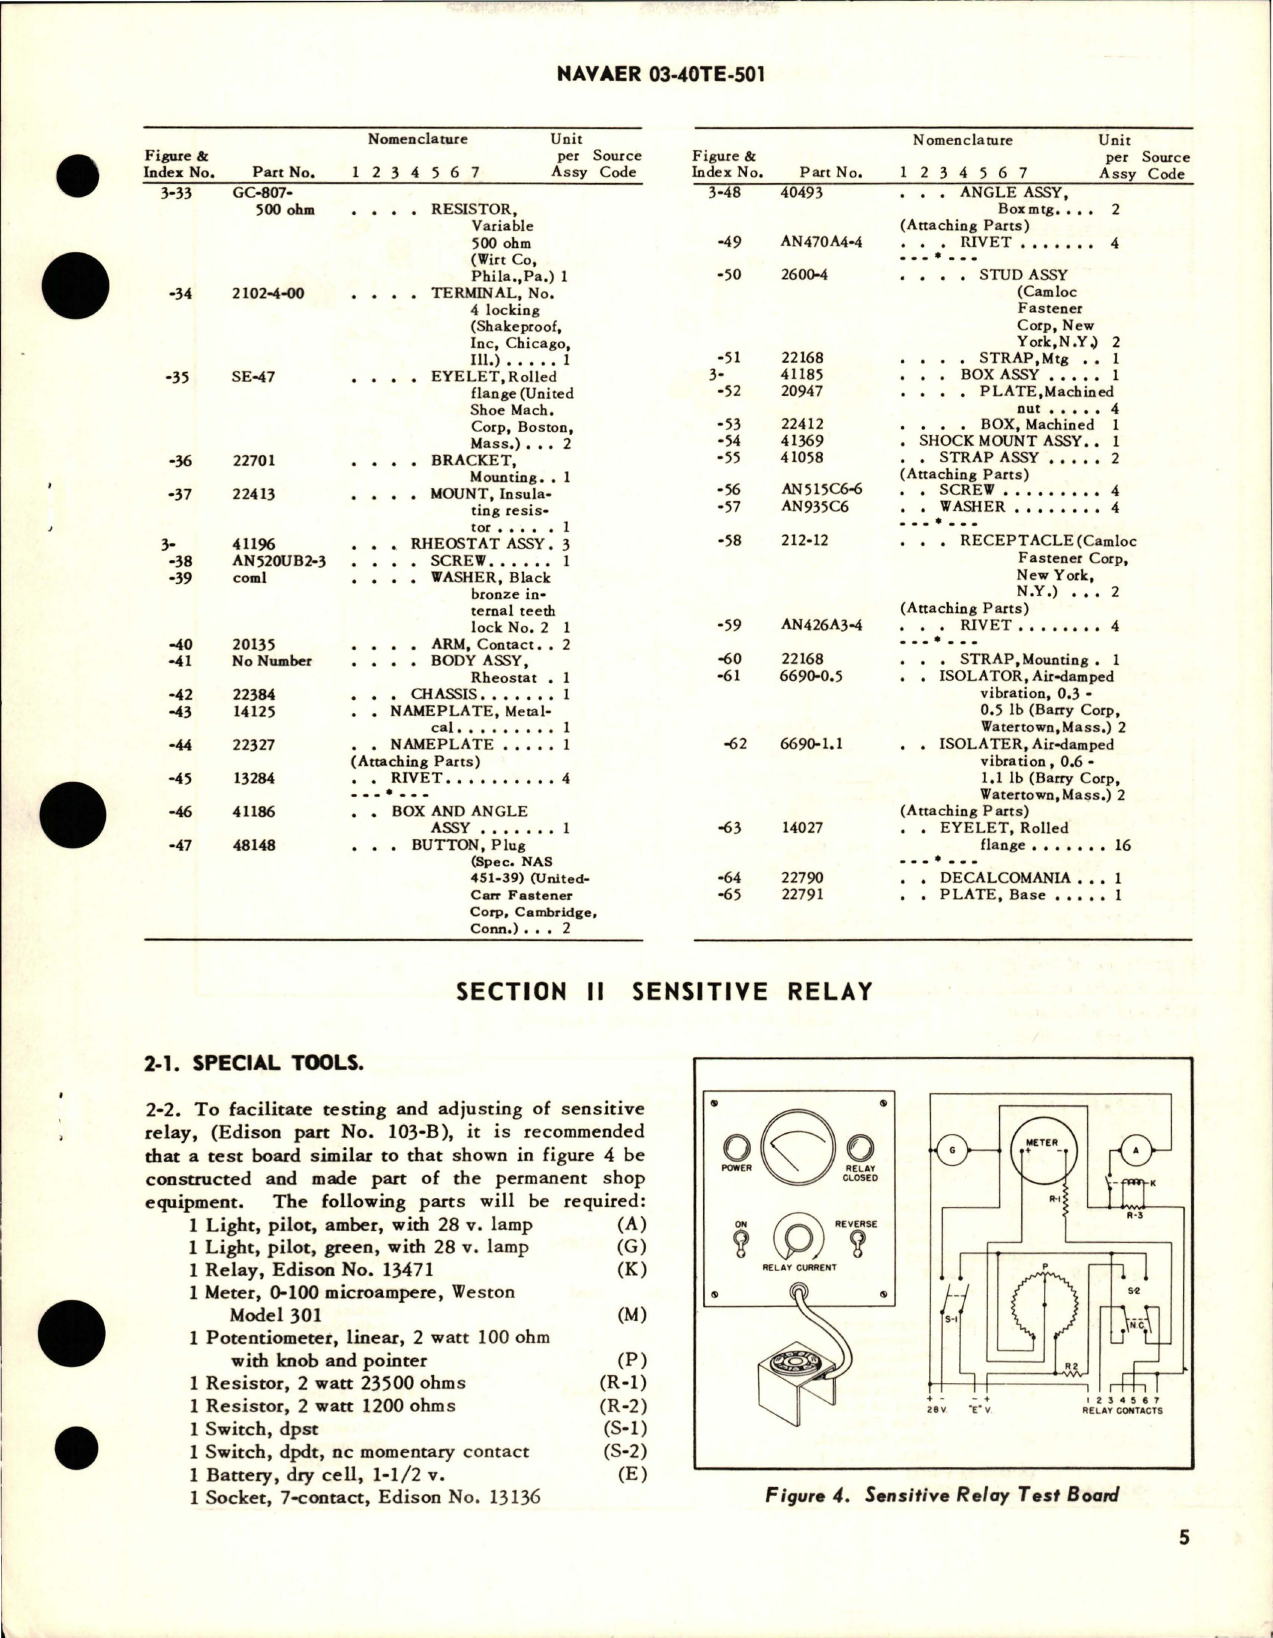 Sample page 5 from AirCorps Library document: Overhaul Instructions with Parts Breakdown for Temperature Indicating & Alarm System Control Assembly - 183-6X 